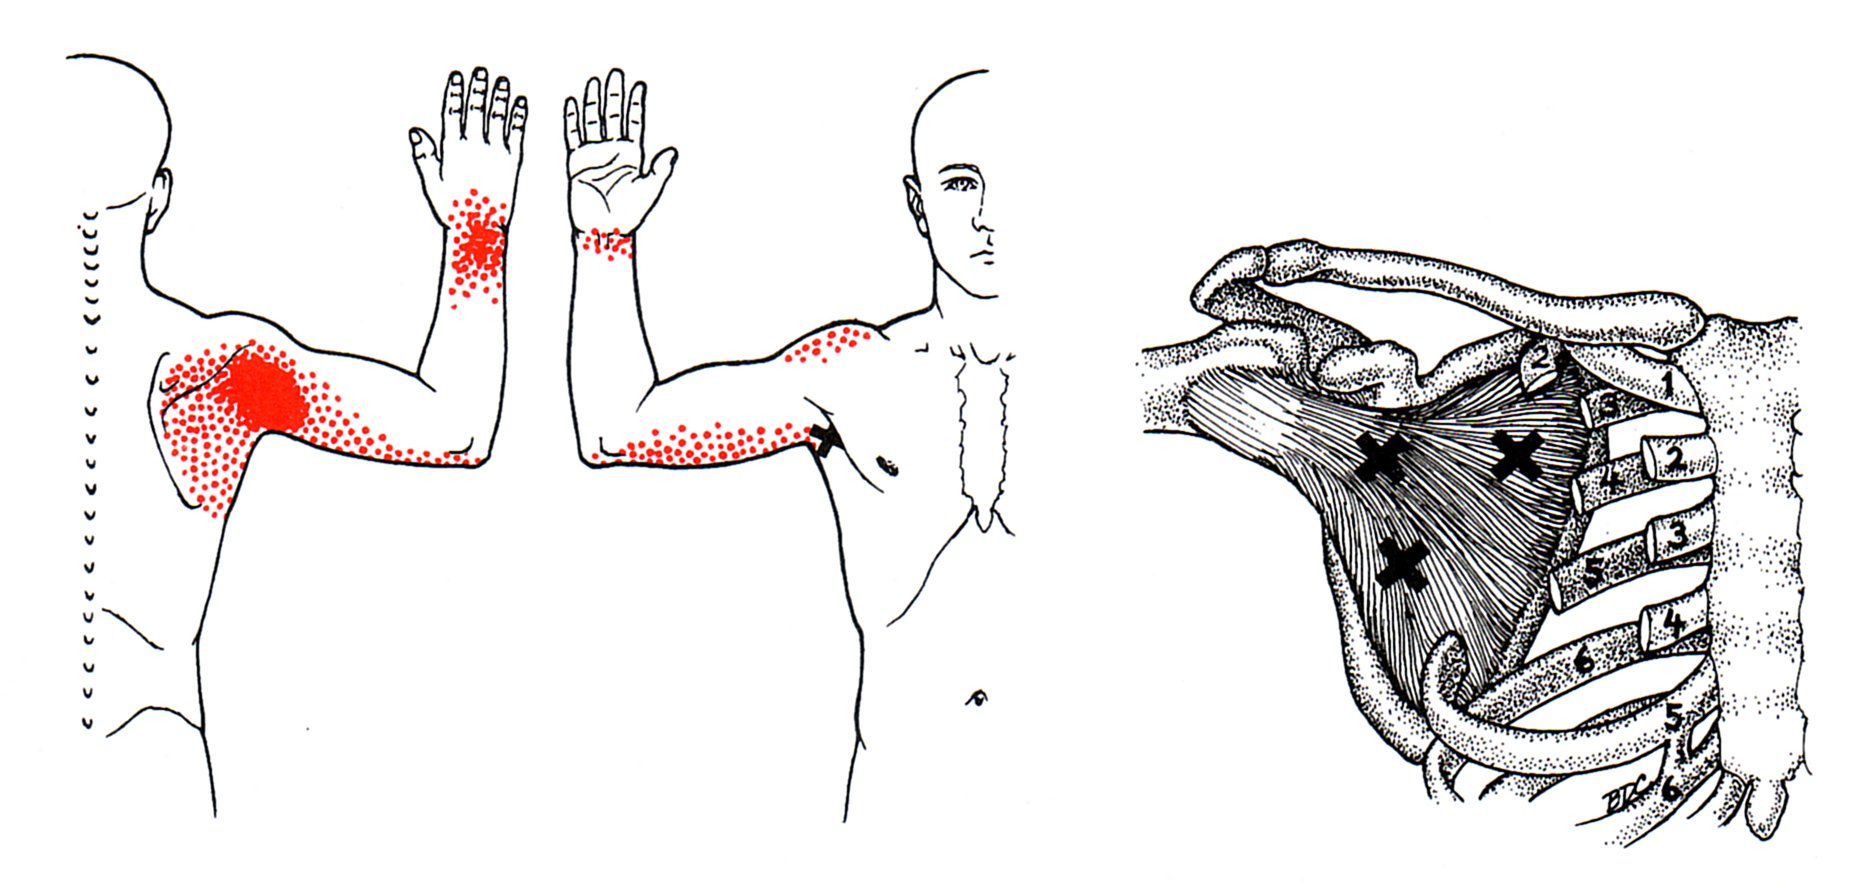 Subscapularis - rotator cufff muscle